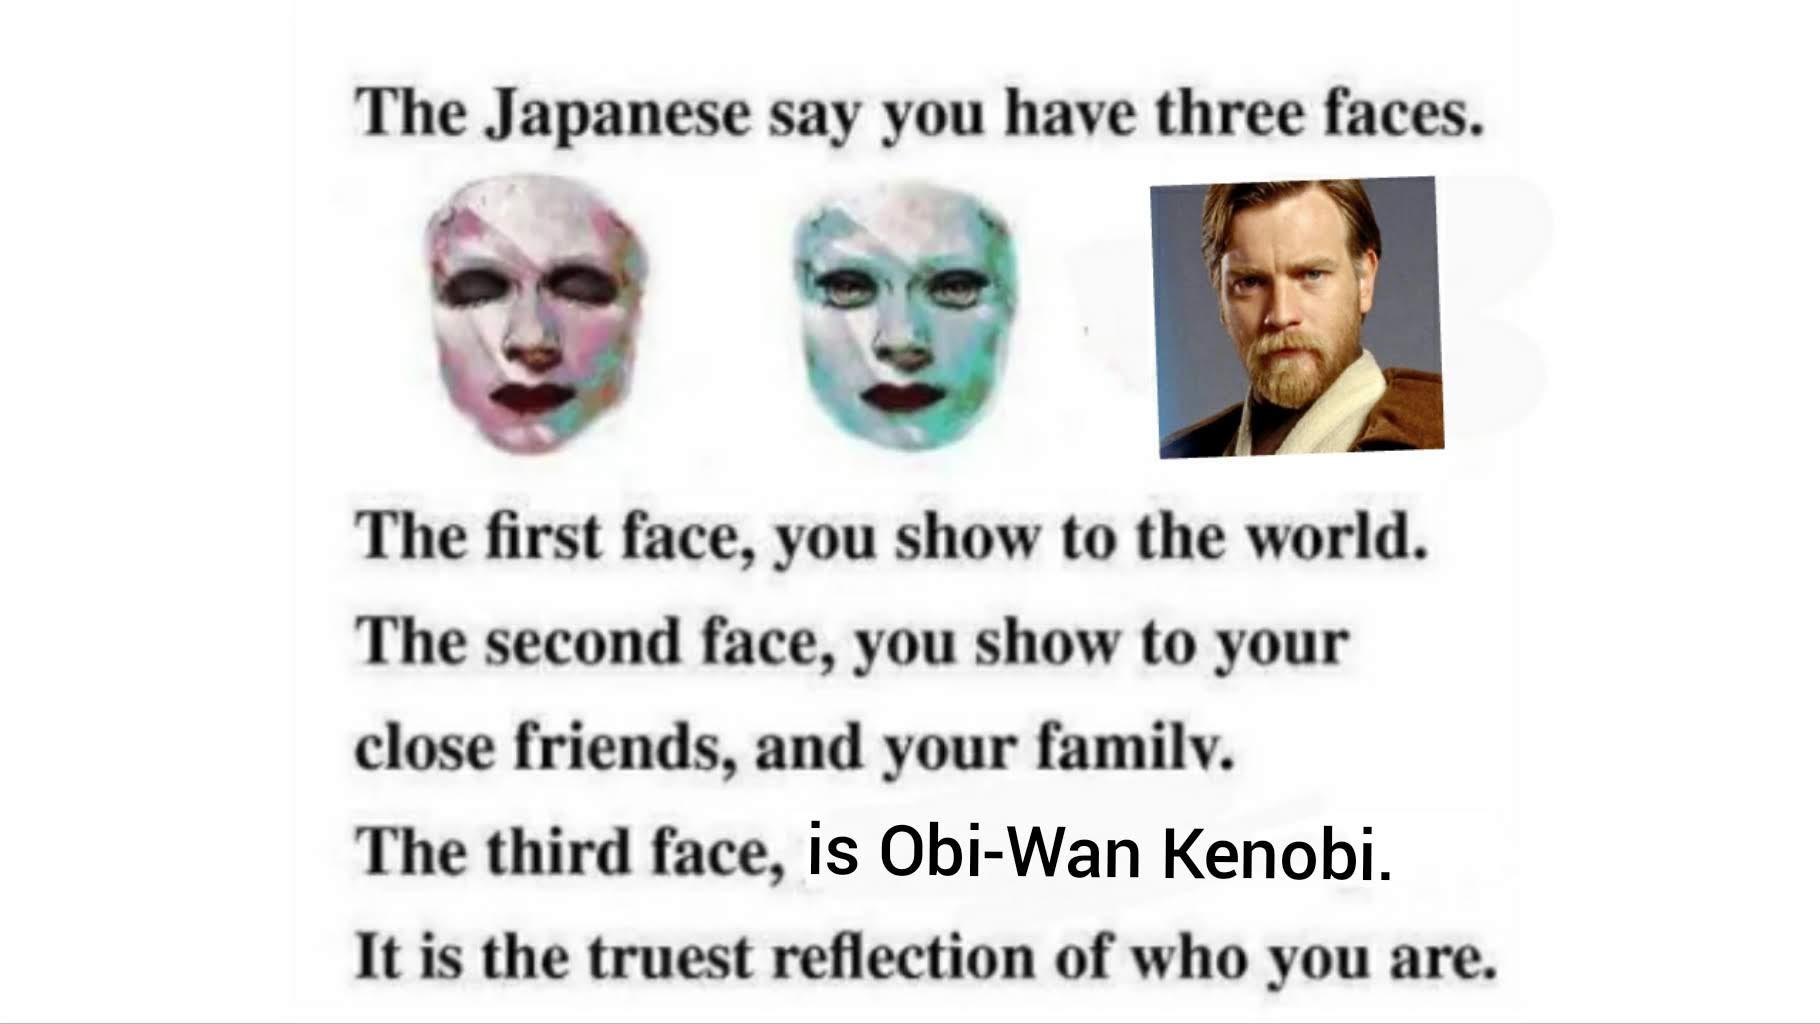 japanese say you have three faces - The Japanese say you have three faces. The first face, you show to the world. The second face, you show to your close friends, and your family. The third face, is ObiWan Kenobi. It is the truest reflection of who you ar